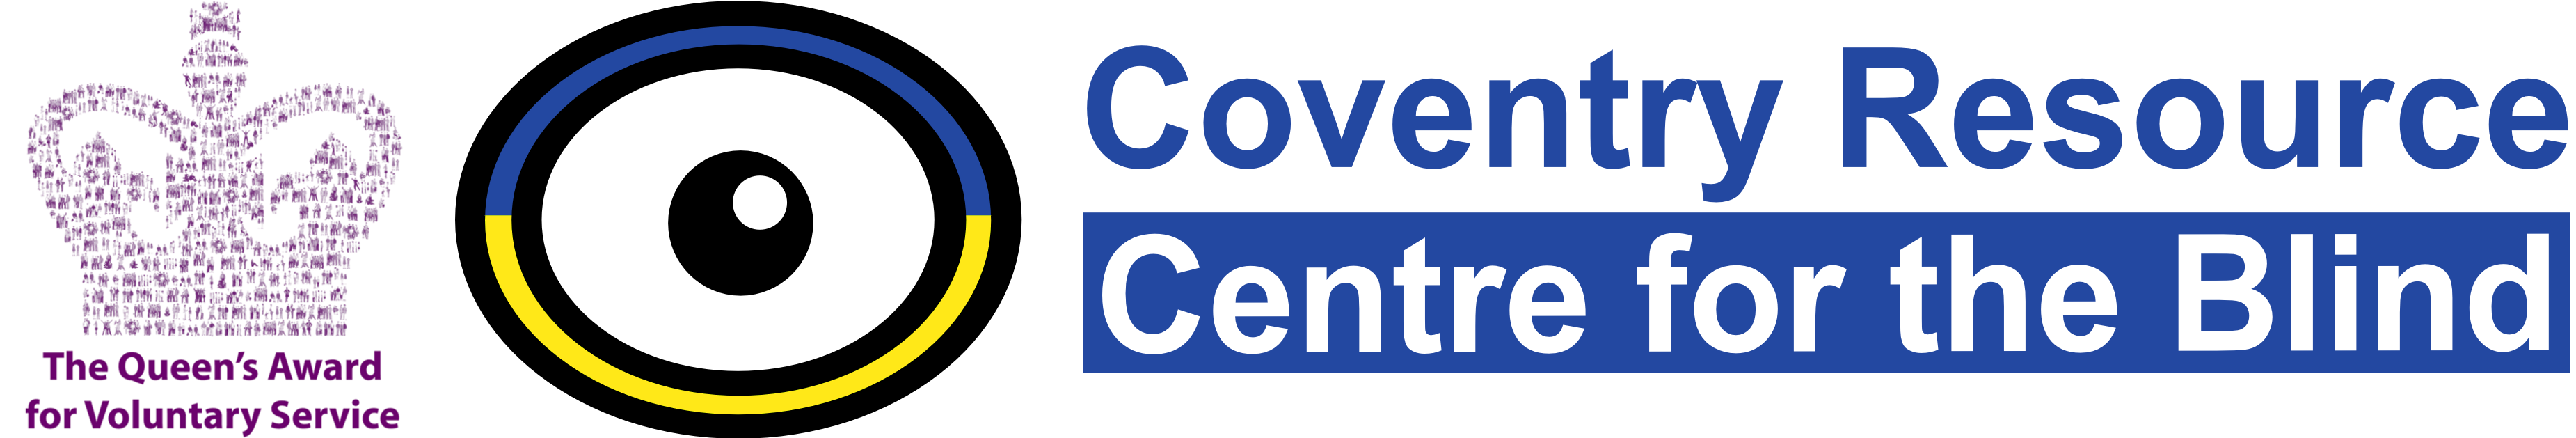 Coventry Resource Centre for the Blind